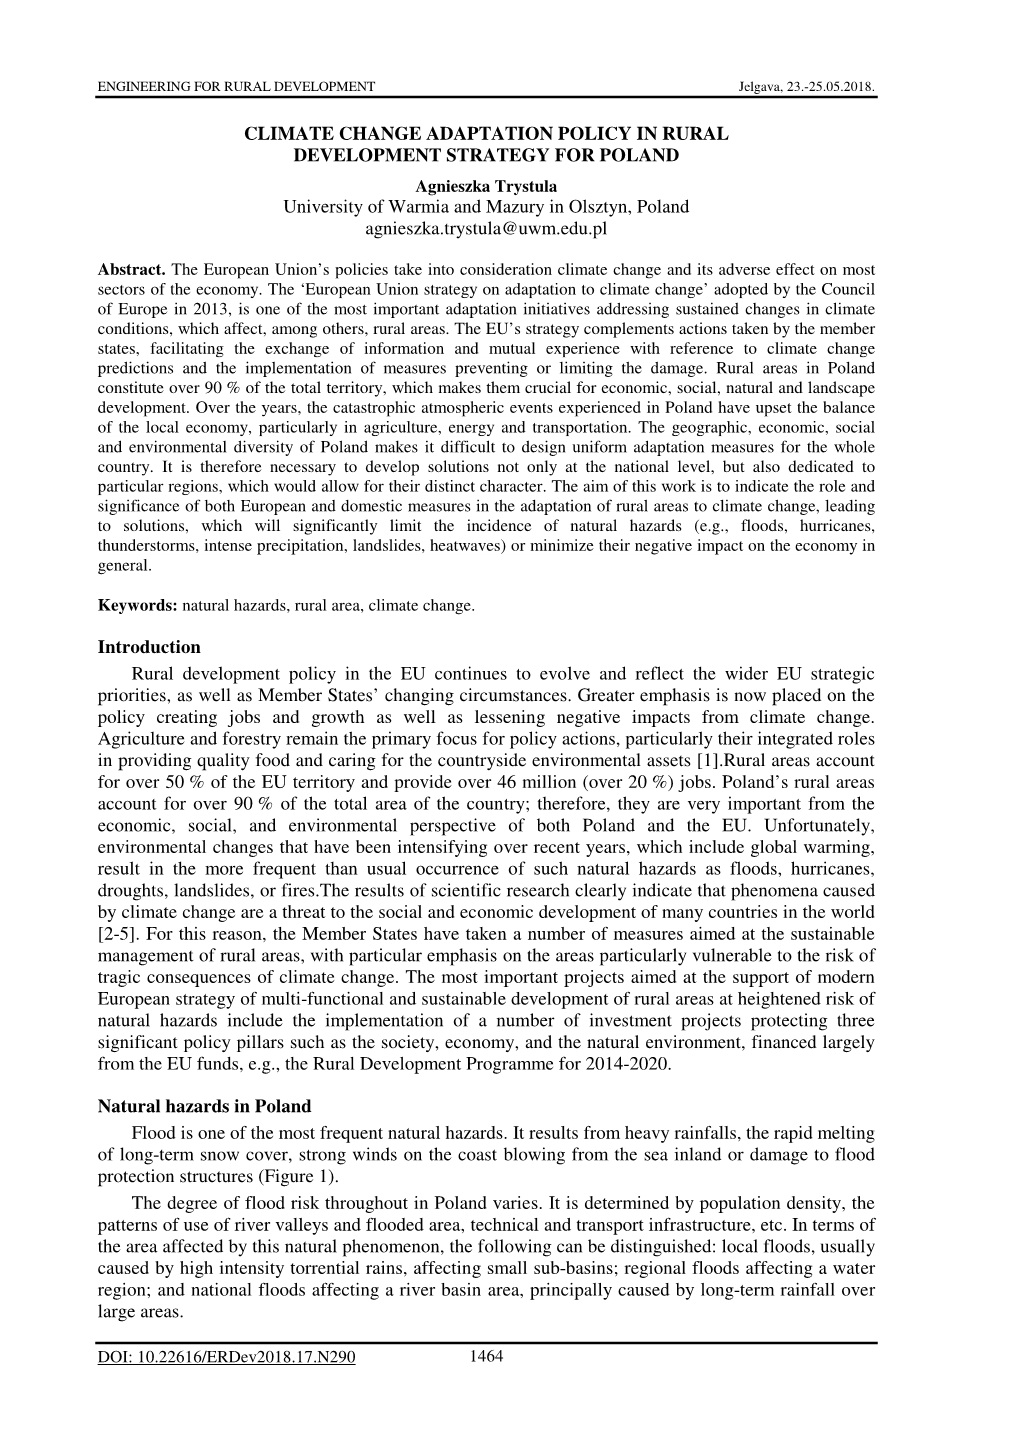 CLIMATE CHANGE ADAPTATION POLICY in RURAL DEVELOPMENT STRATEGY for POLAND University of Warmia and Mazury in Olsztyn, Poland Ag